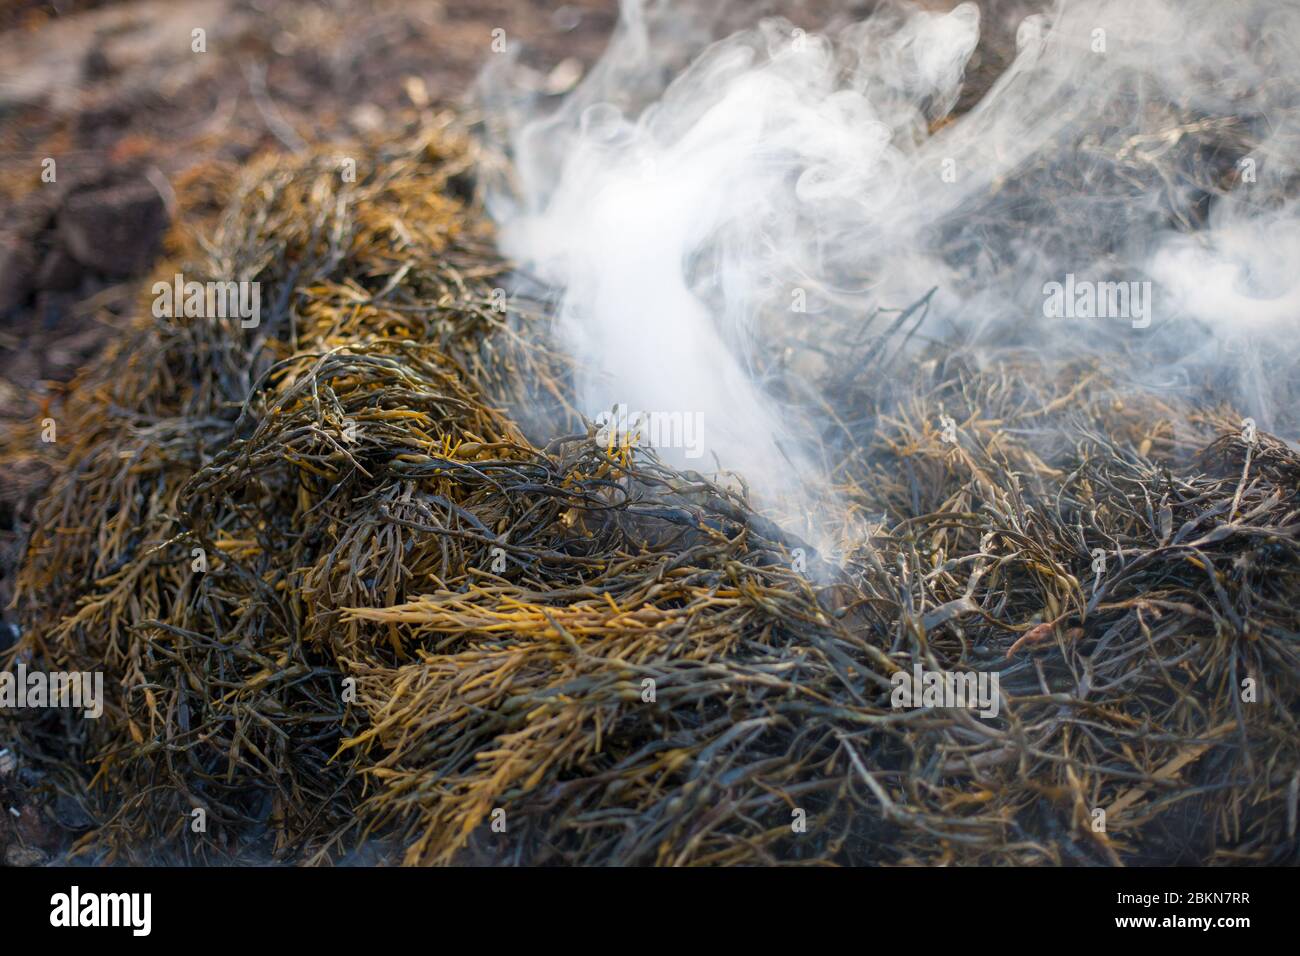 Steam and smoke rise from a pile of seaweed in preparation for a lobster bake on Vinalhaven Island in Maine, USA Stock Photo